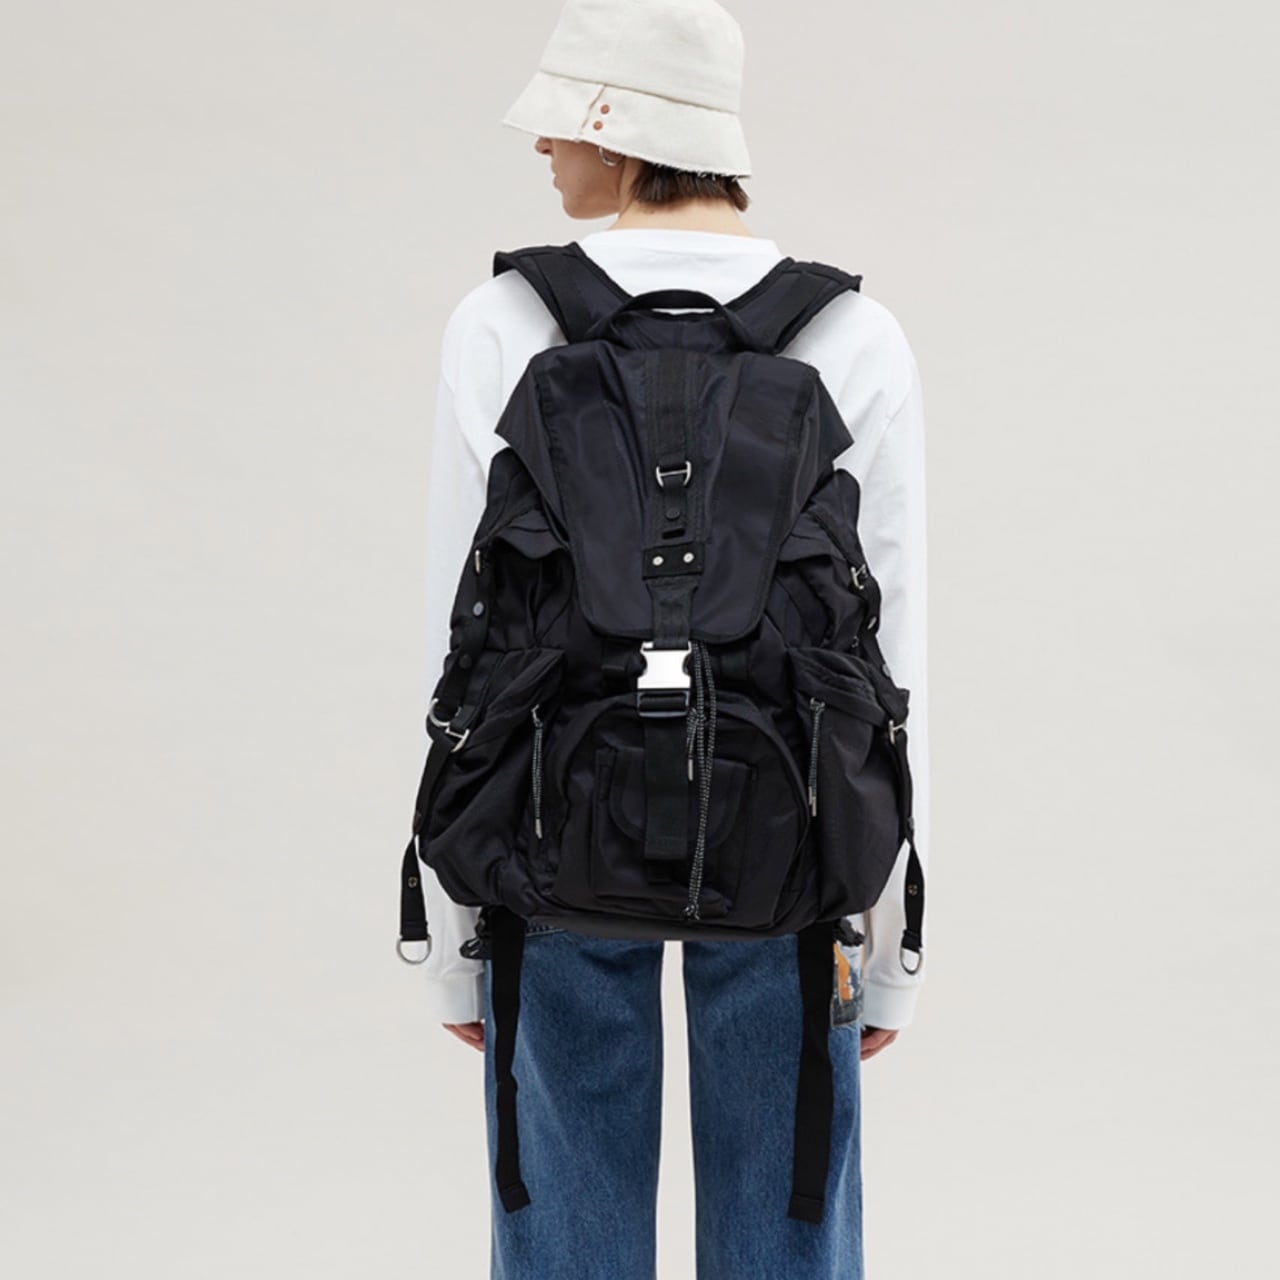 ☆ANDERSSON BELL☆UNISEX TECHNICAL BERLIN BACKPACK aaa237u | M.O.S